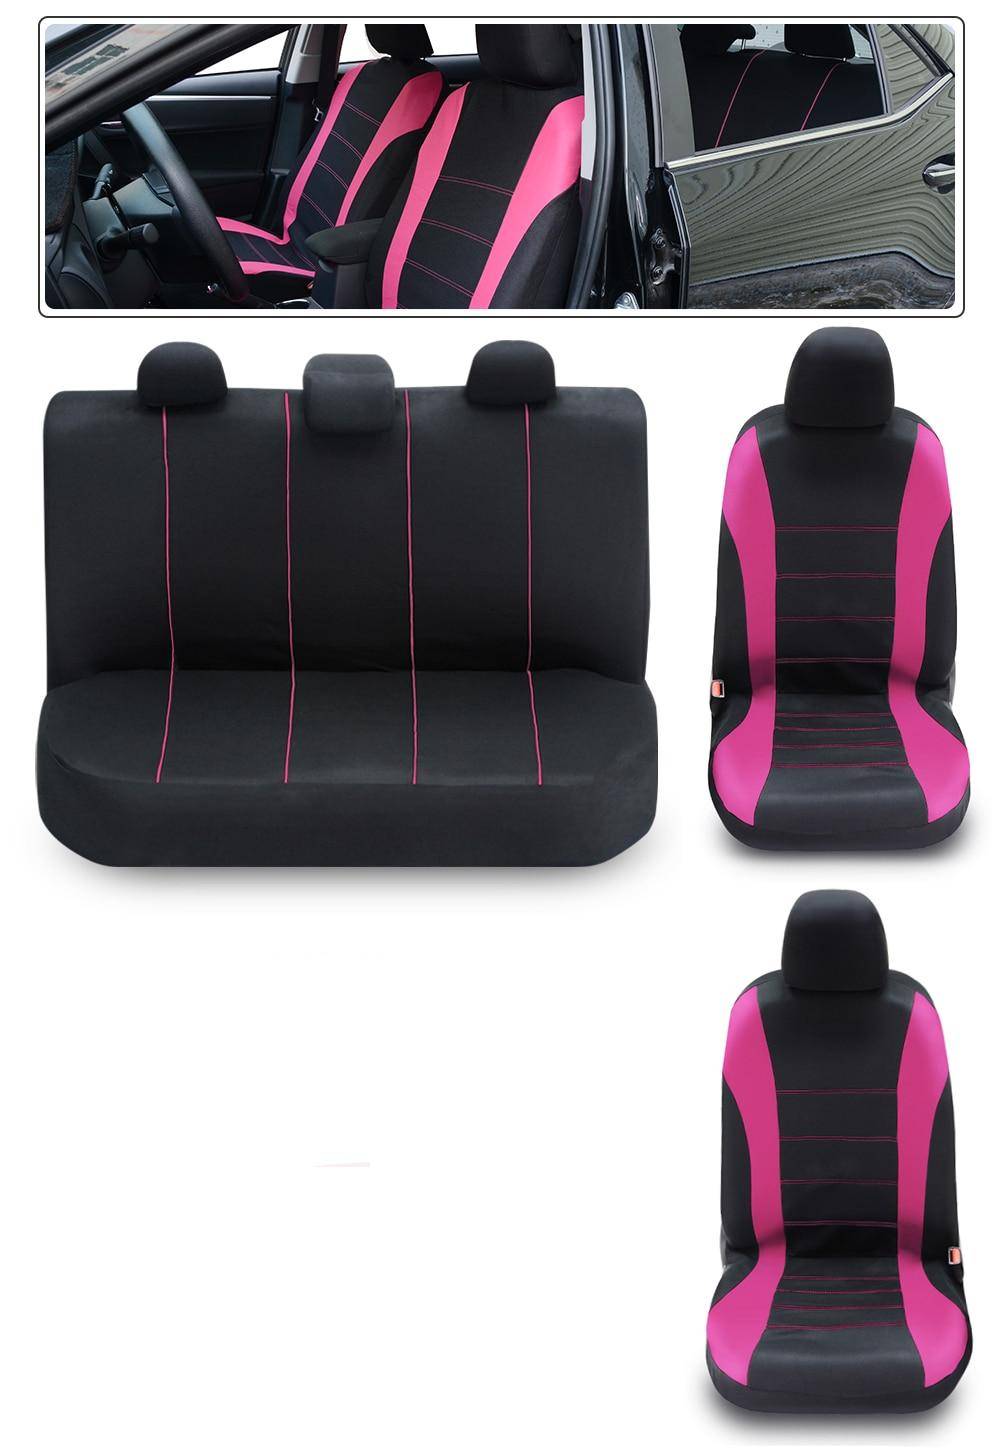 Breathable Seat Cover For Car Car Extras & Accessories Seat Covers 10d87971b2173359521857: 1 seat Black|1 seat Blue|1 seat Gray|1 seat Green|1 seat Orange|1 seat Pink|1 seat Red|1 seat Yellow|2 seats Black|2 seats Blue|2 seats Gray|2 seats Green|2 seats Orange|2 seats Pink|2 seats Red|2 seats Yellow|5 seats Black|5 seats Blue|5 seats Green|5 seats Grey|5 seats Orange|5 seats Pink|5 seats Red|5 seats Yellow|7 seats Black|7 seats Blue|7 seats Green|7 seats Grey|7 seats Orange|7 seats Pink|7 seats Red|7 seats Yellow